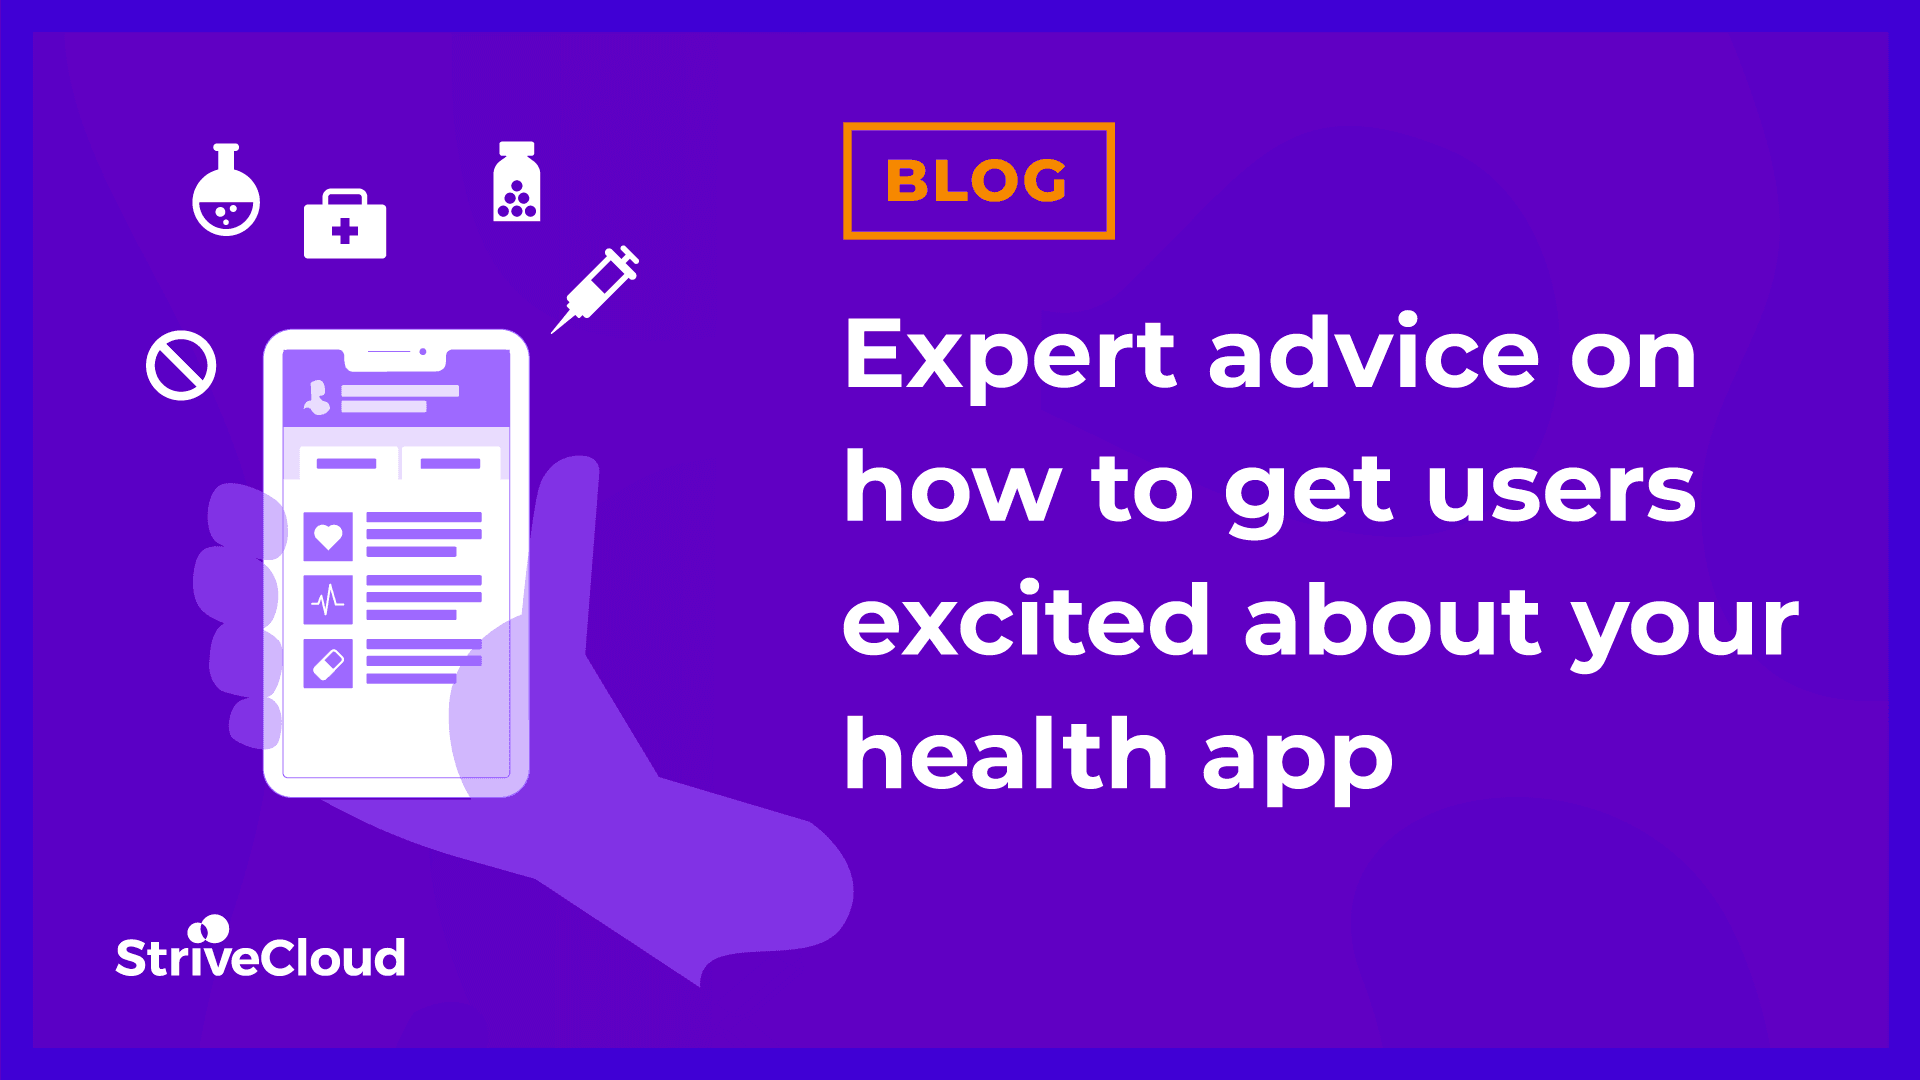 Expert advice on how to get users excited about your health app